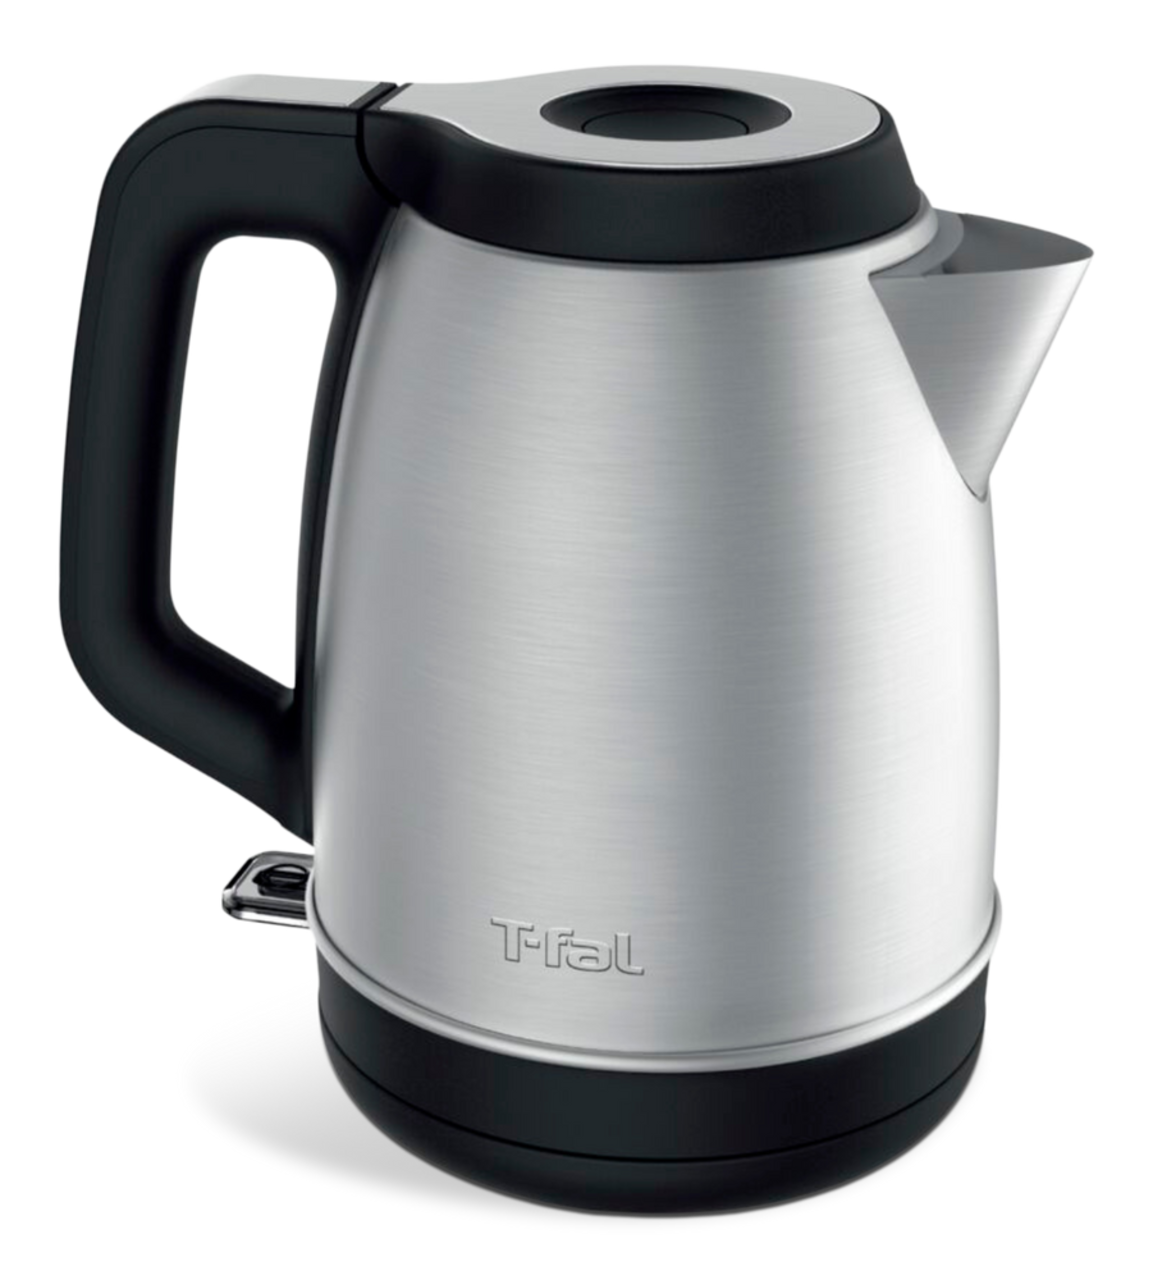 https://media-www.canadiantire.ca/product/living/kitchen/kitchen-appliances/0438214/t-fal-element-ss-kettle-567241d5-f693-48e1-99ef-98c62e1342d7.png?imdensity=1&imwidth=640&impolicy=mZoom